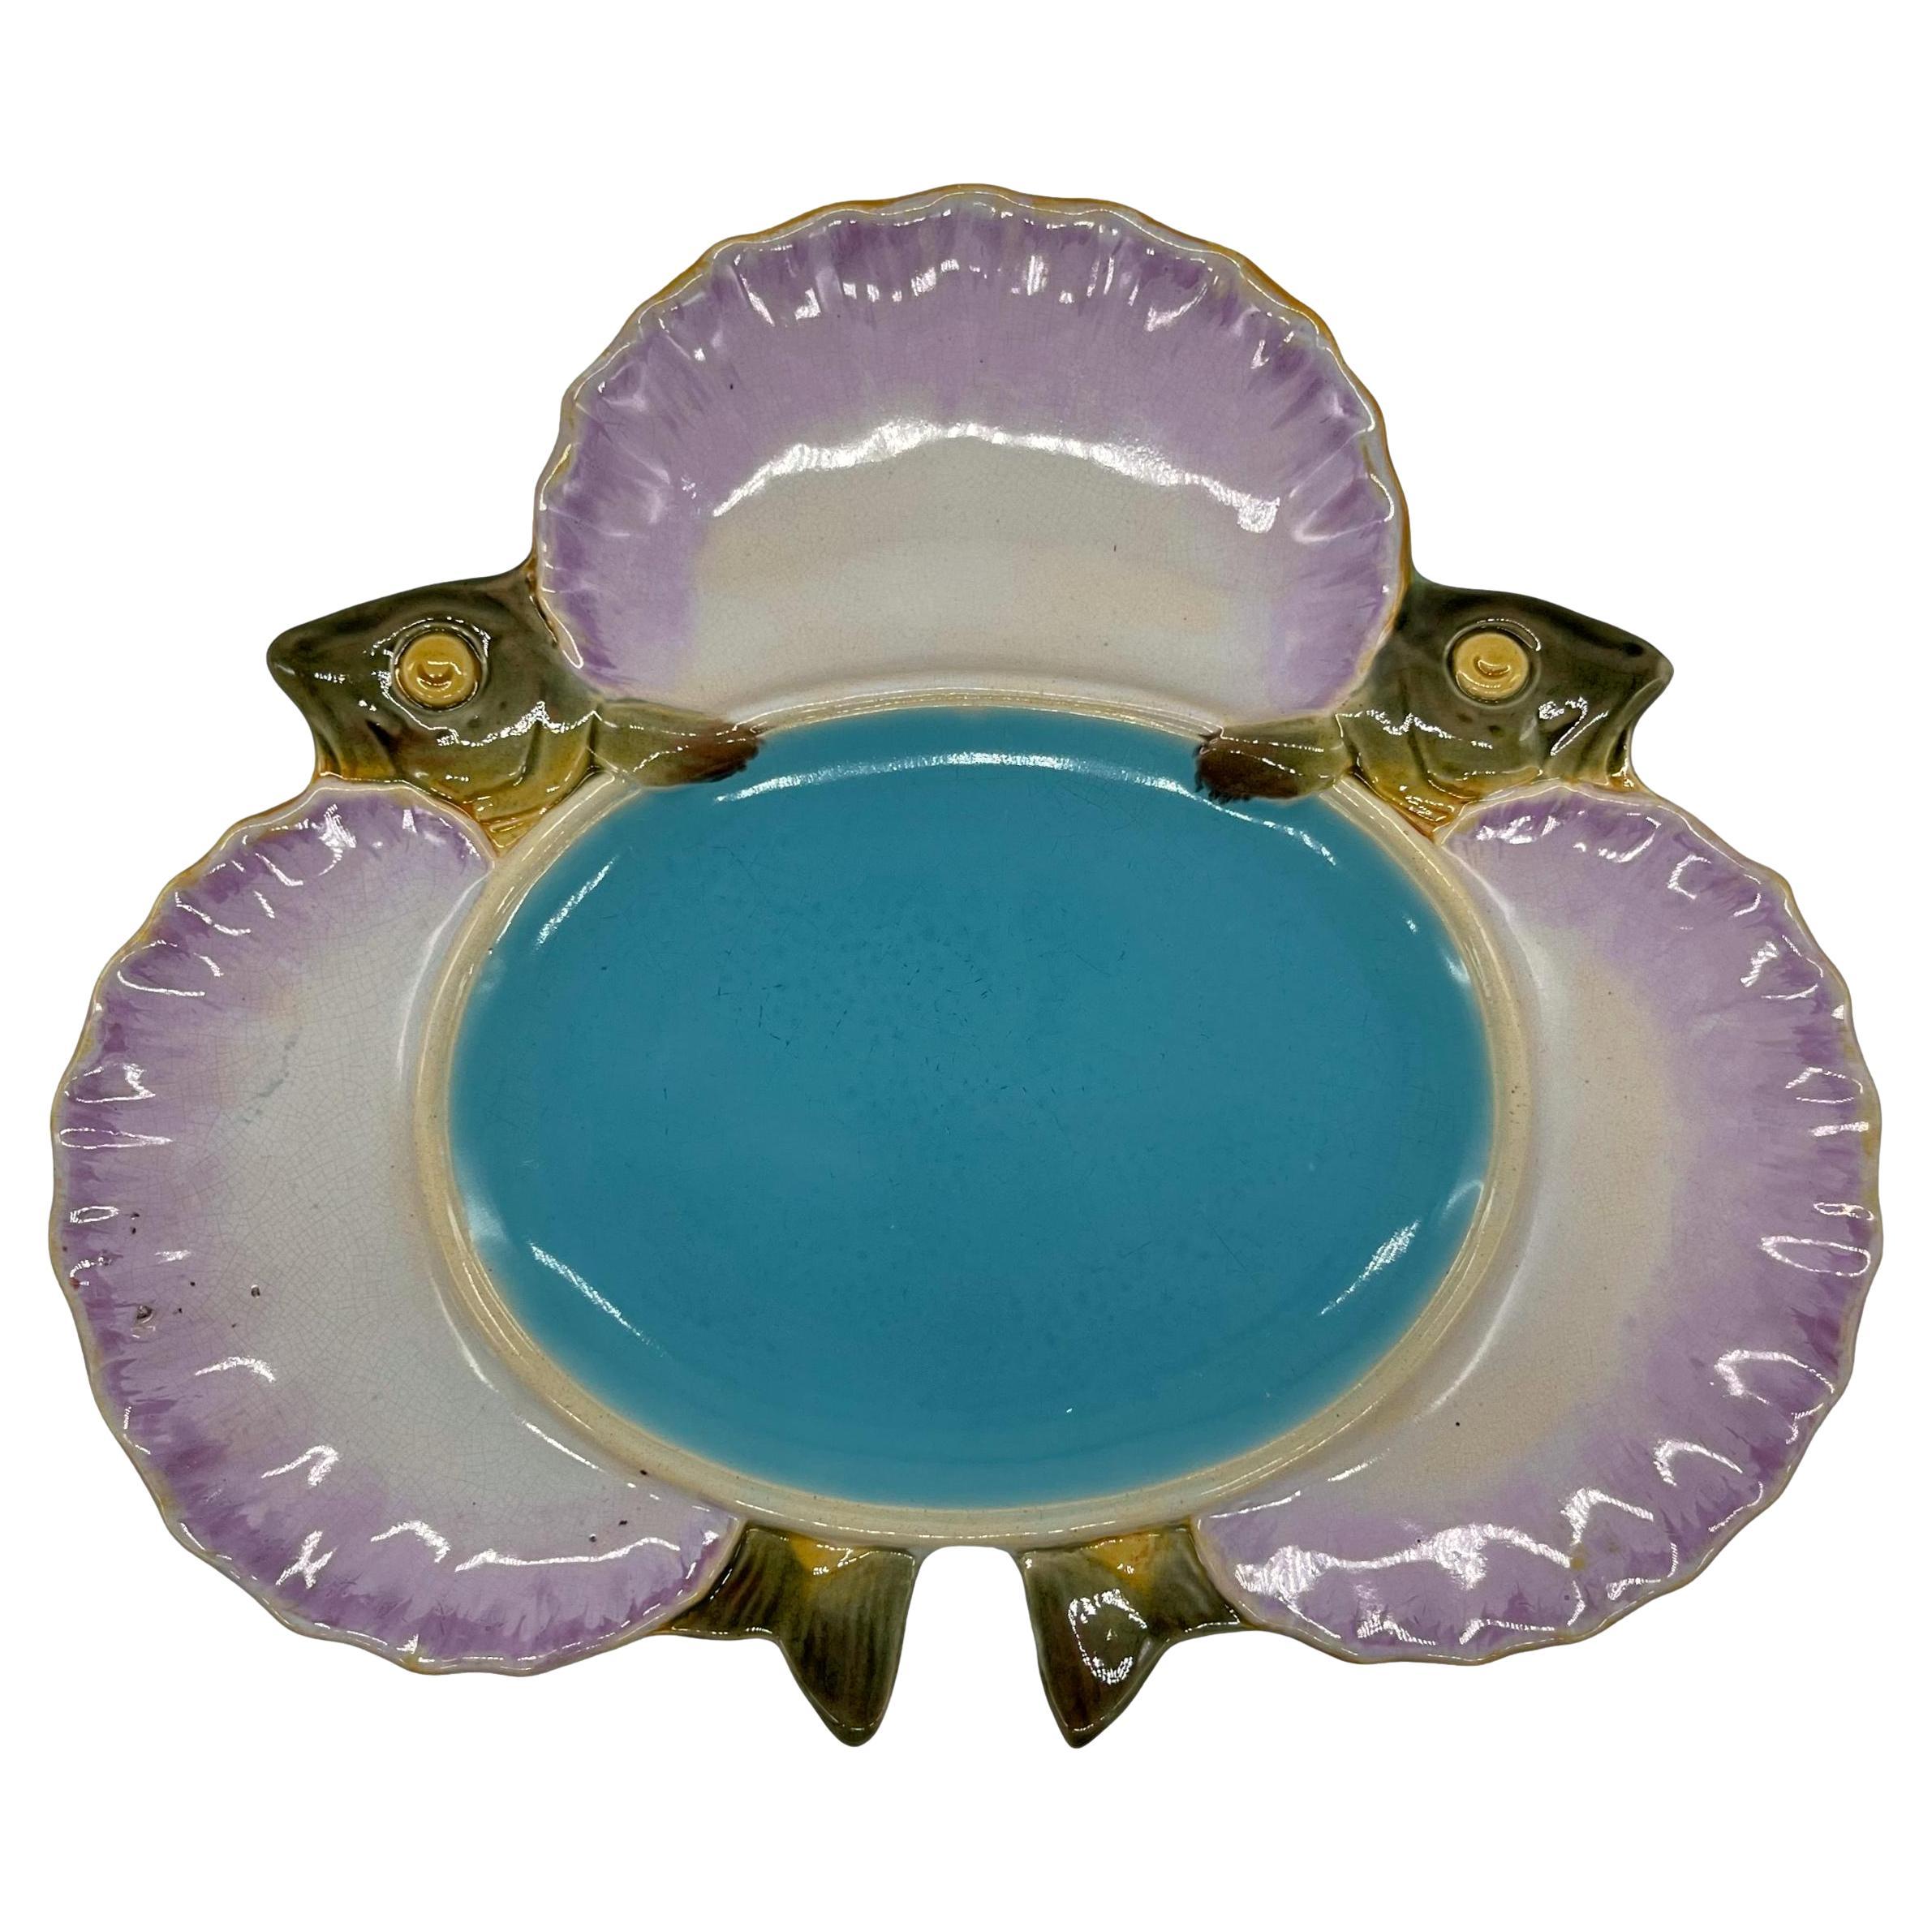 Minton Majolica Trefoil Fish Plate, Turquoise and Marbled Pinks, Dated 1875